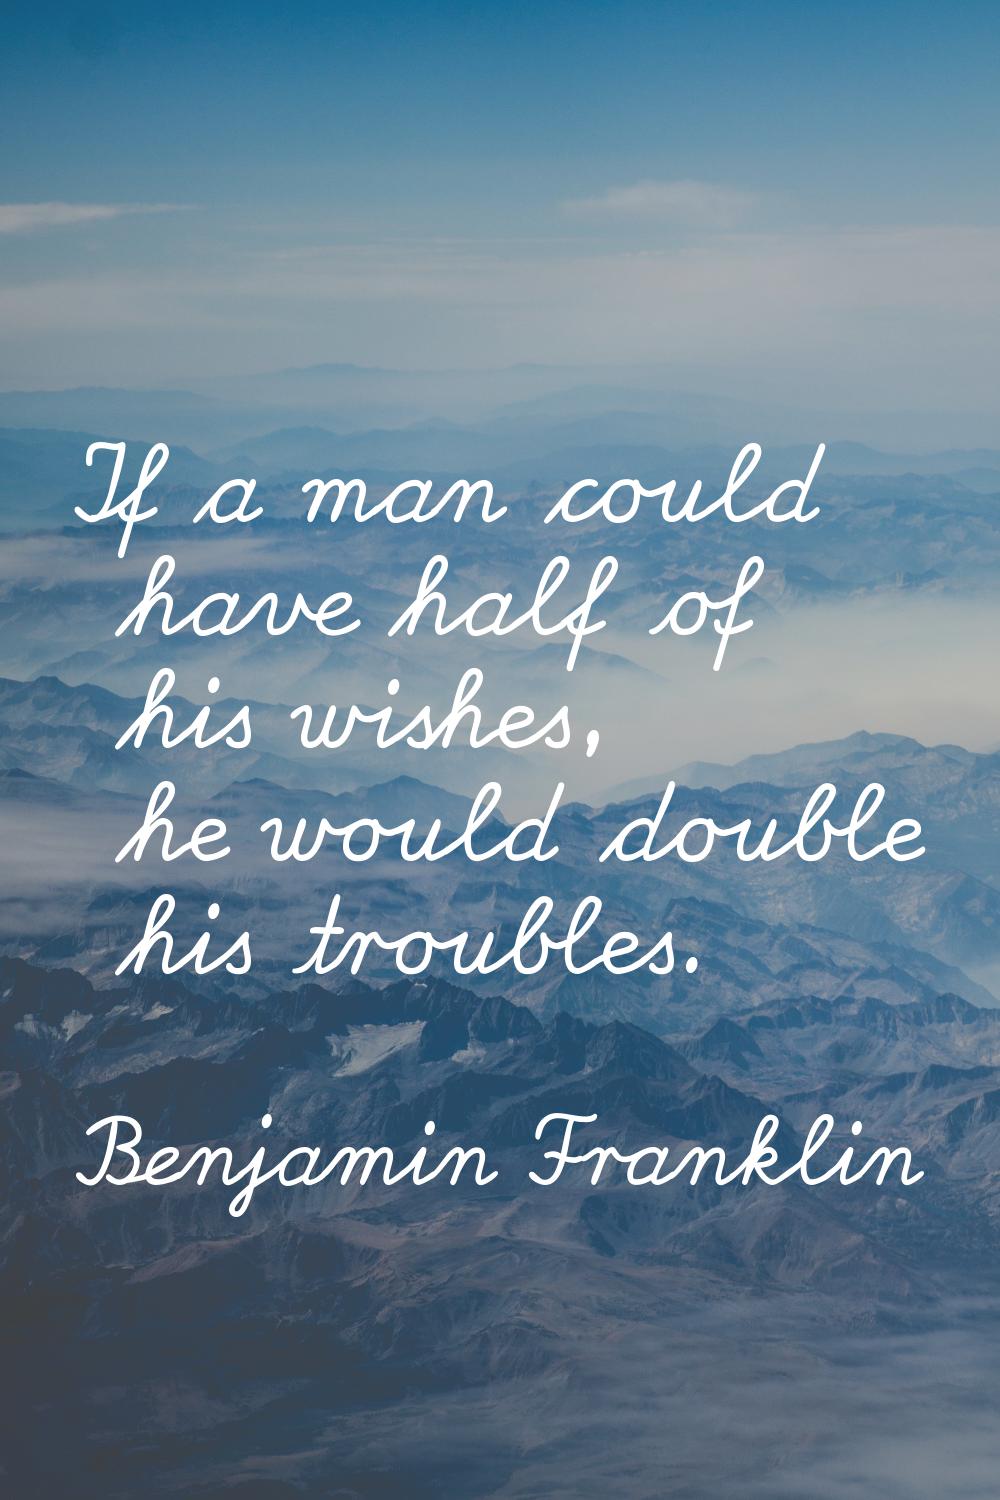 If a man could have half of his wishes, he would double his troubles.